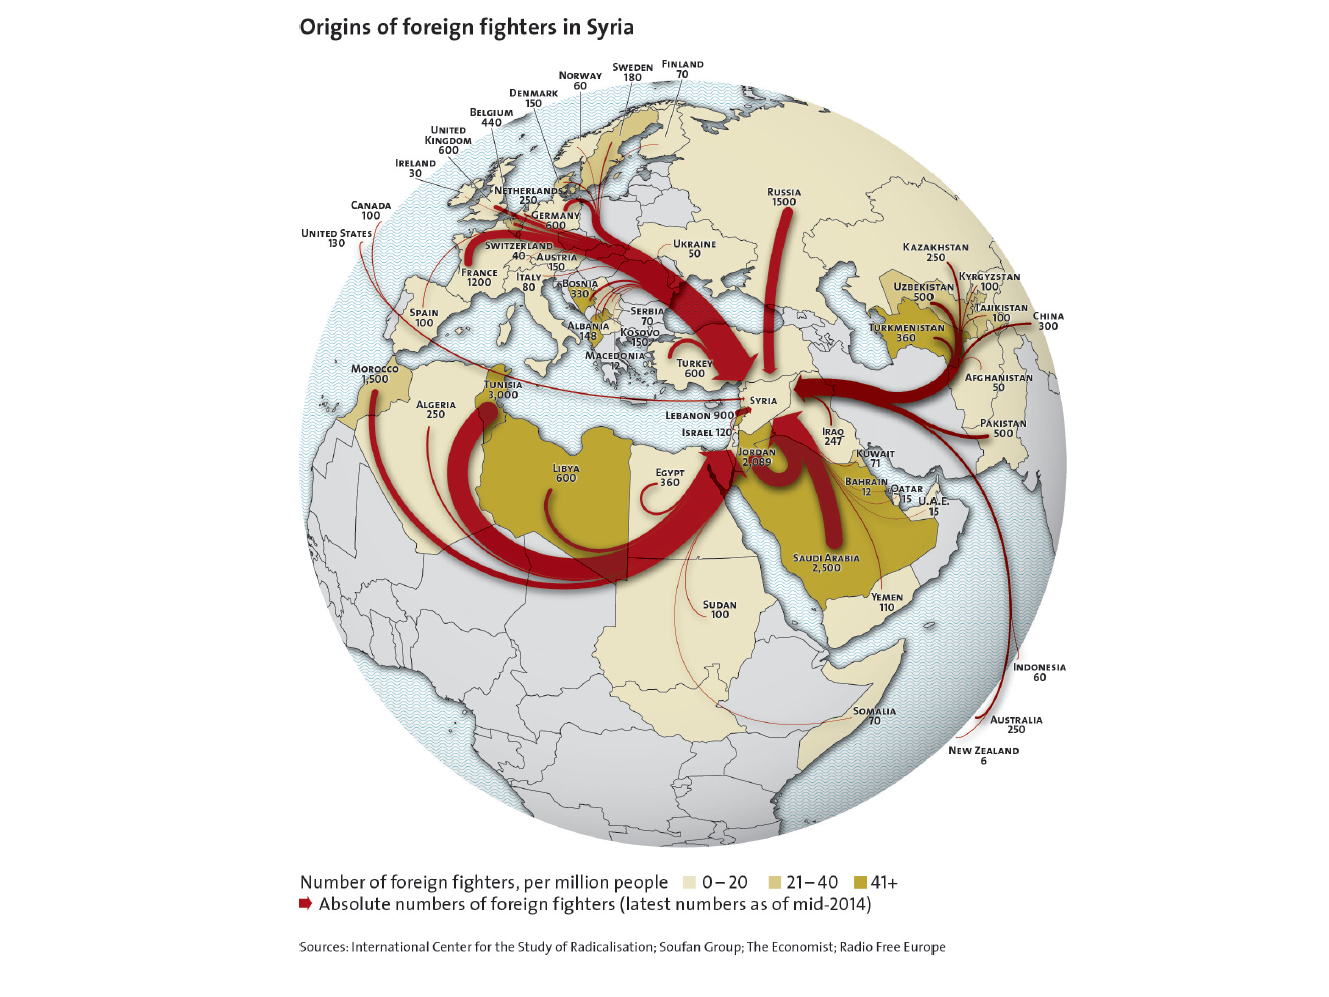 Enlarged view: Origins of Foreign Fighters in Syria